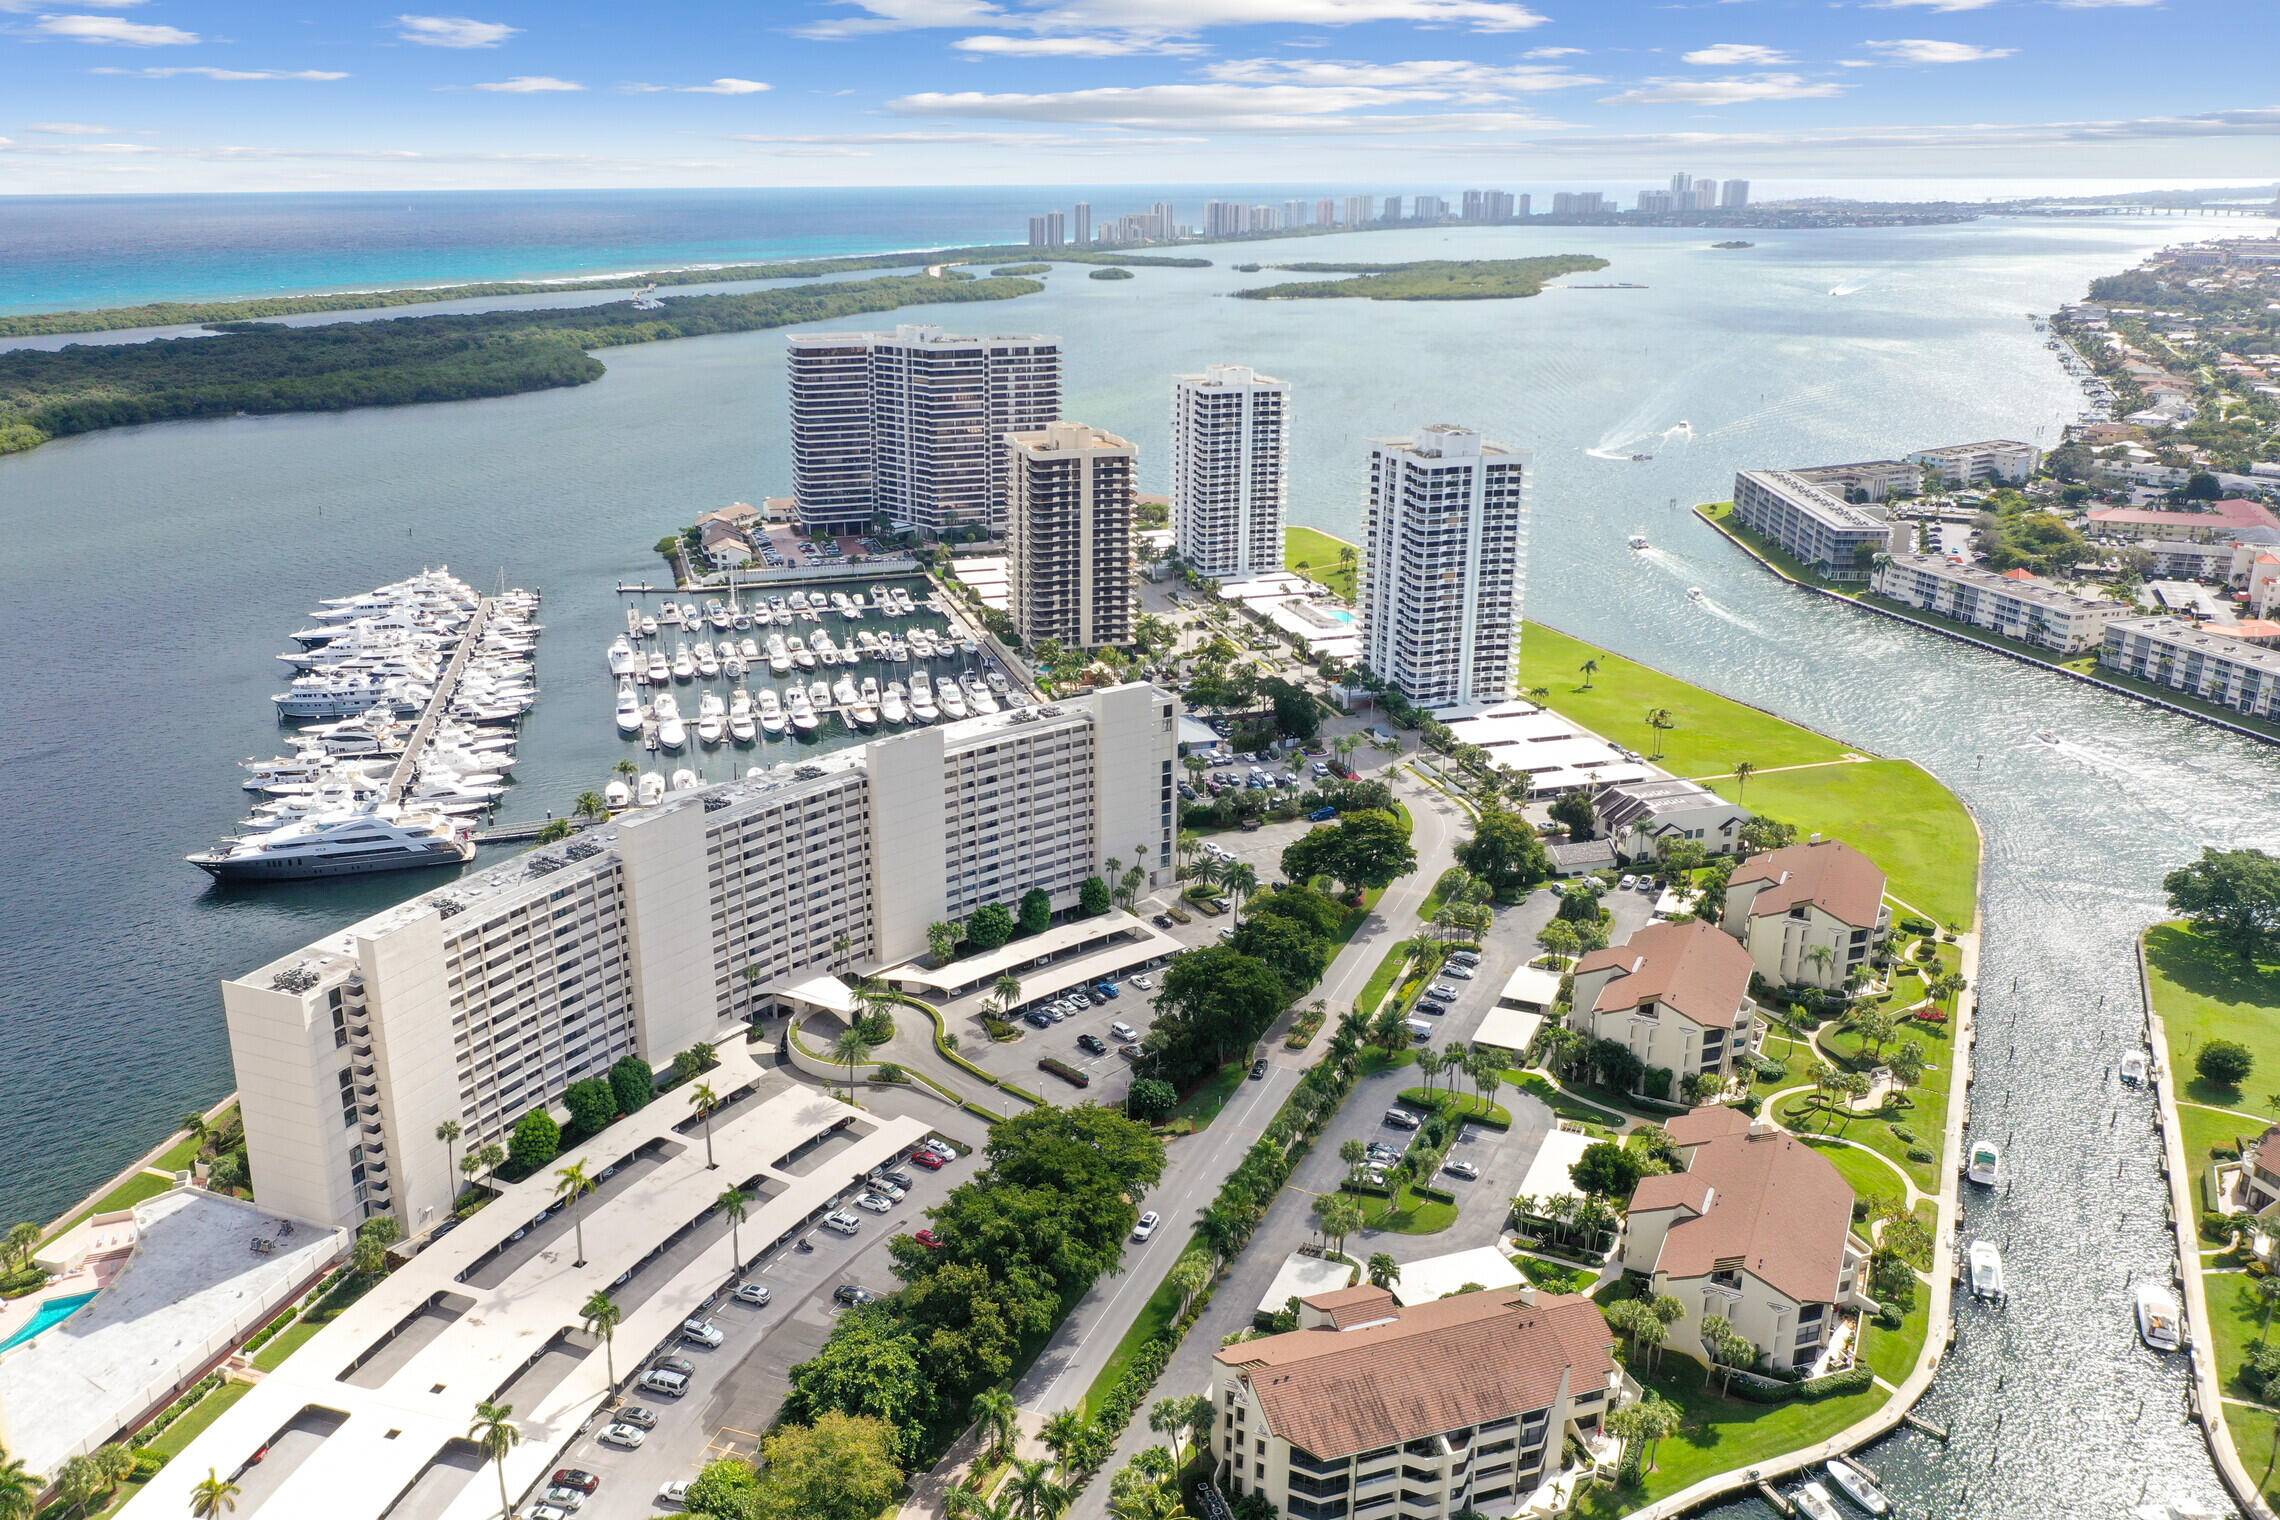 Rare updated end unit with spectacular unobstructed intracoastal, city marina views in this 2 bed 2 bath with new HURRICANE WINDOWS.